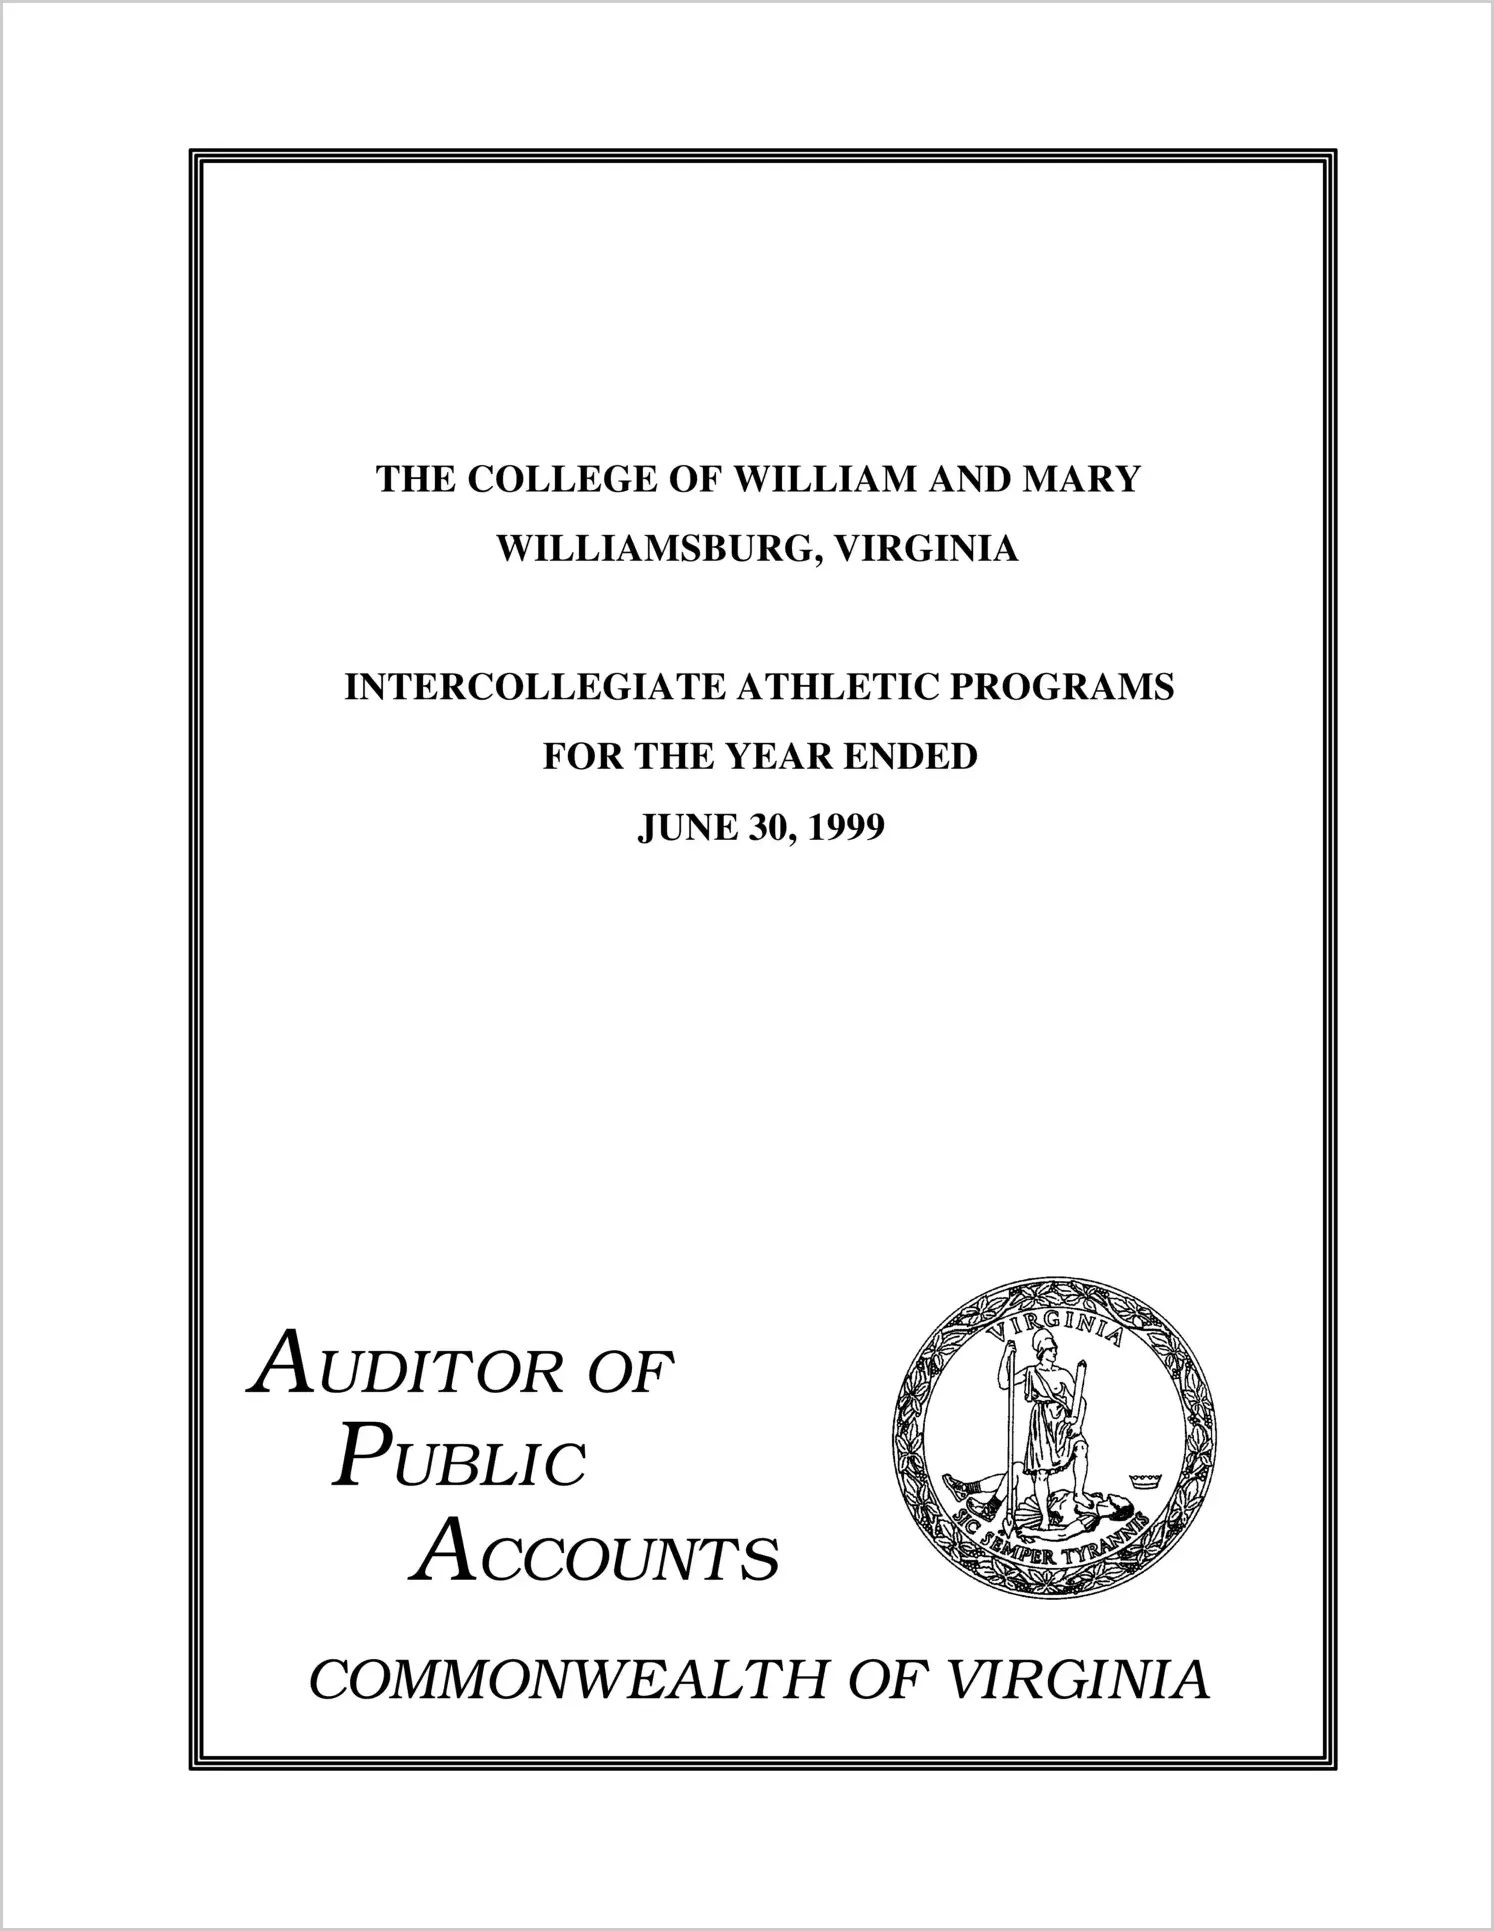 The College of William and Mary Intercollegiate Athletic Programs for the year ended June 30, 1999